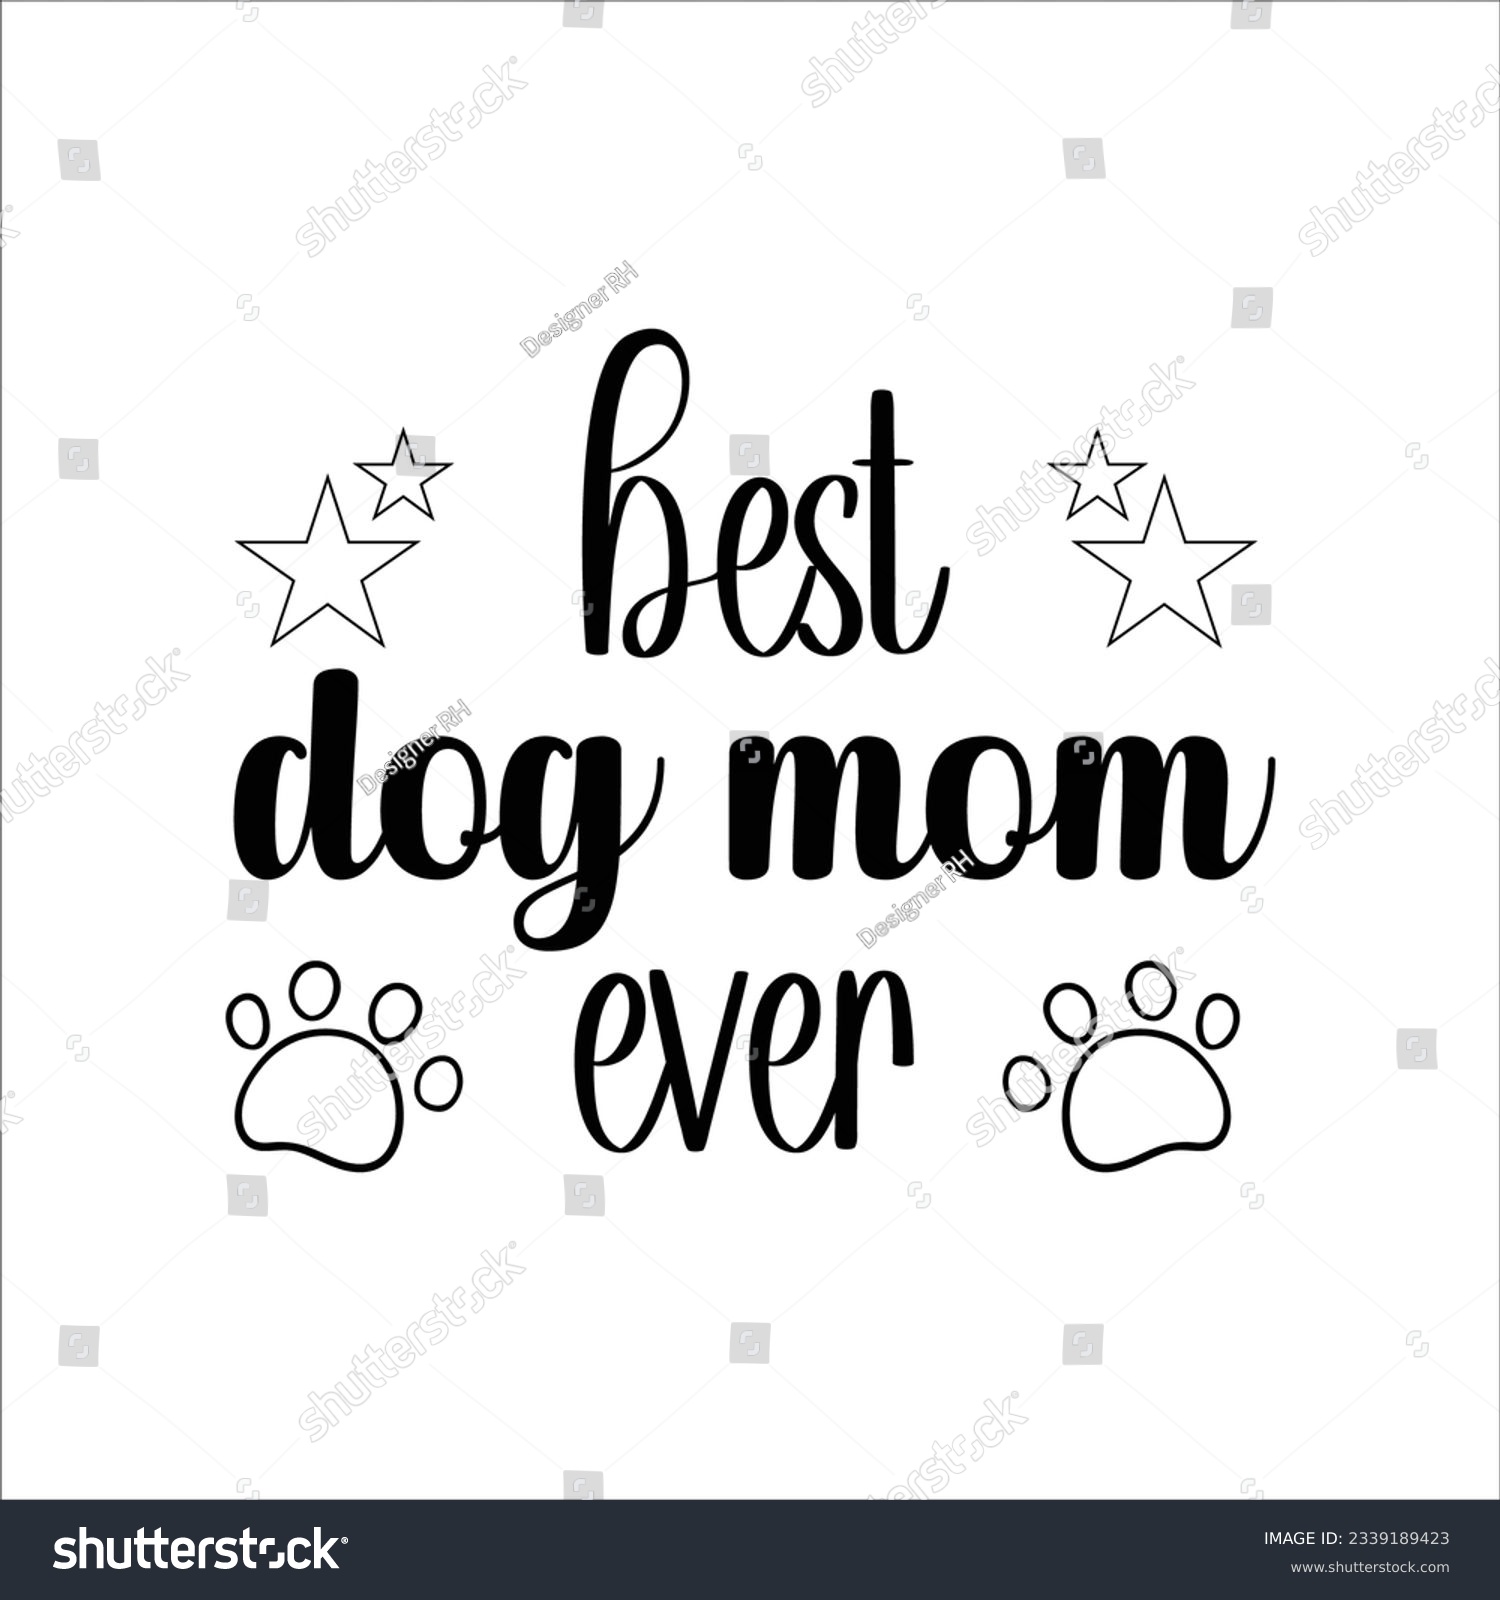 SVG of Doggy Quote, Funny Dog Quote, Cute Puppy SVG , SVG Design, Cute Dog quotes SVG cut file, Touching Dog quotes design, Cute Puppy cut file, Dog eps files, Vector svg